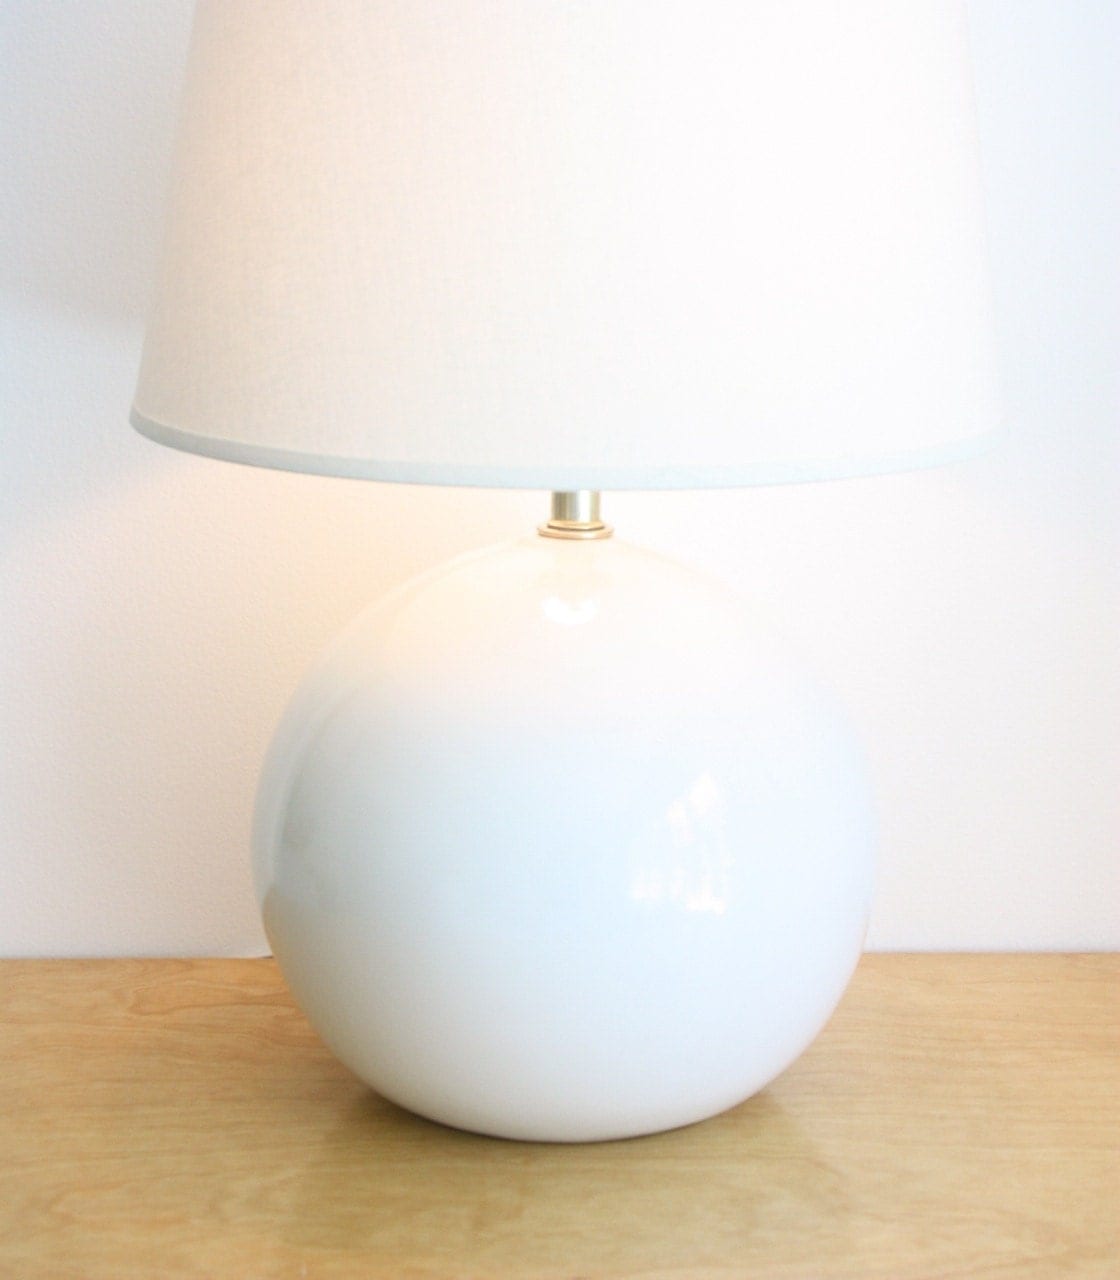 Porcelain Table Lamps on Vintage White Ceramic Ball Table Lamp By Estateeclectic On Etsy